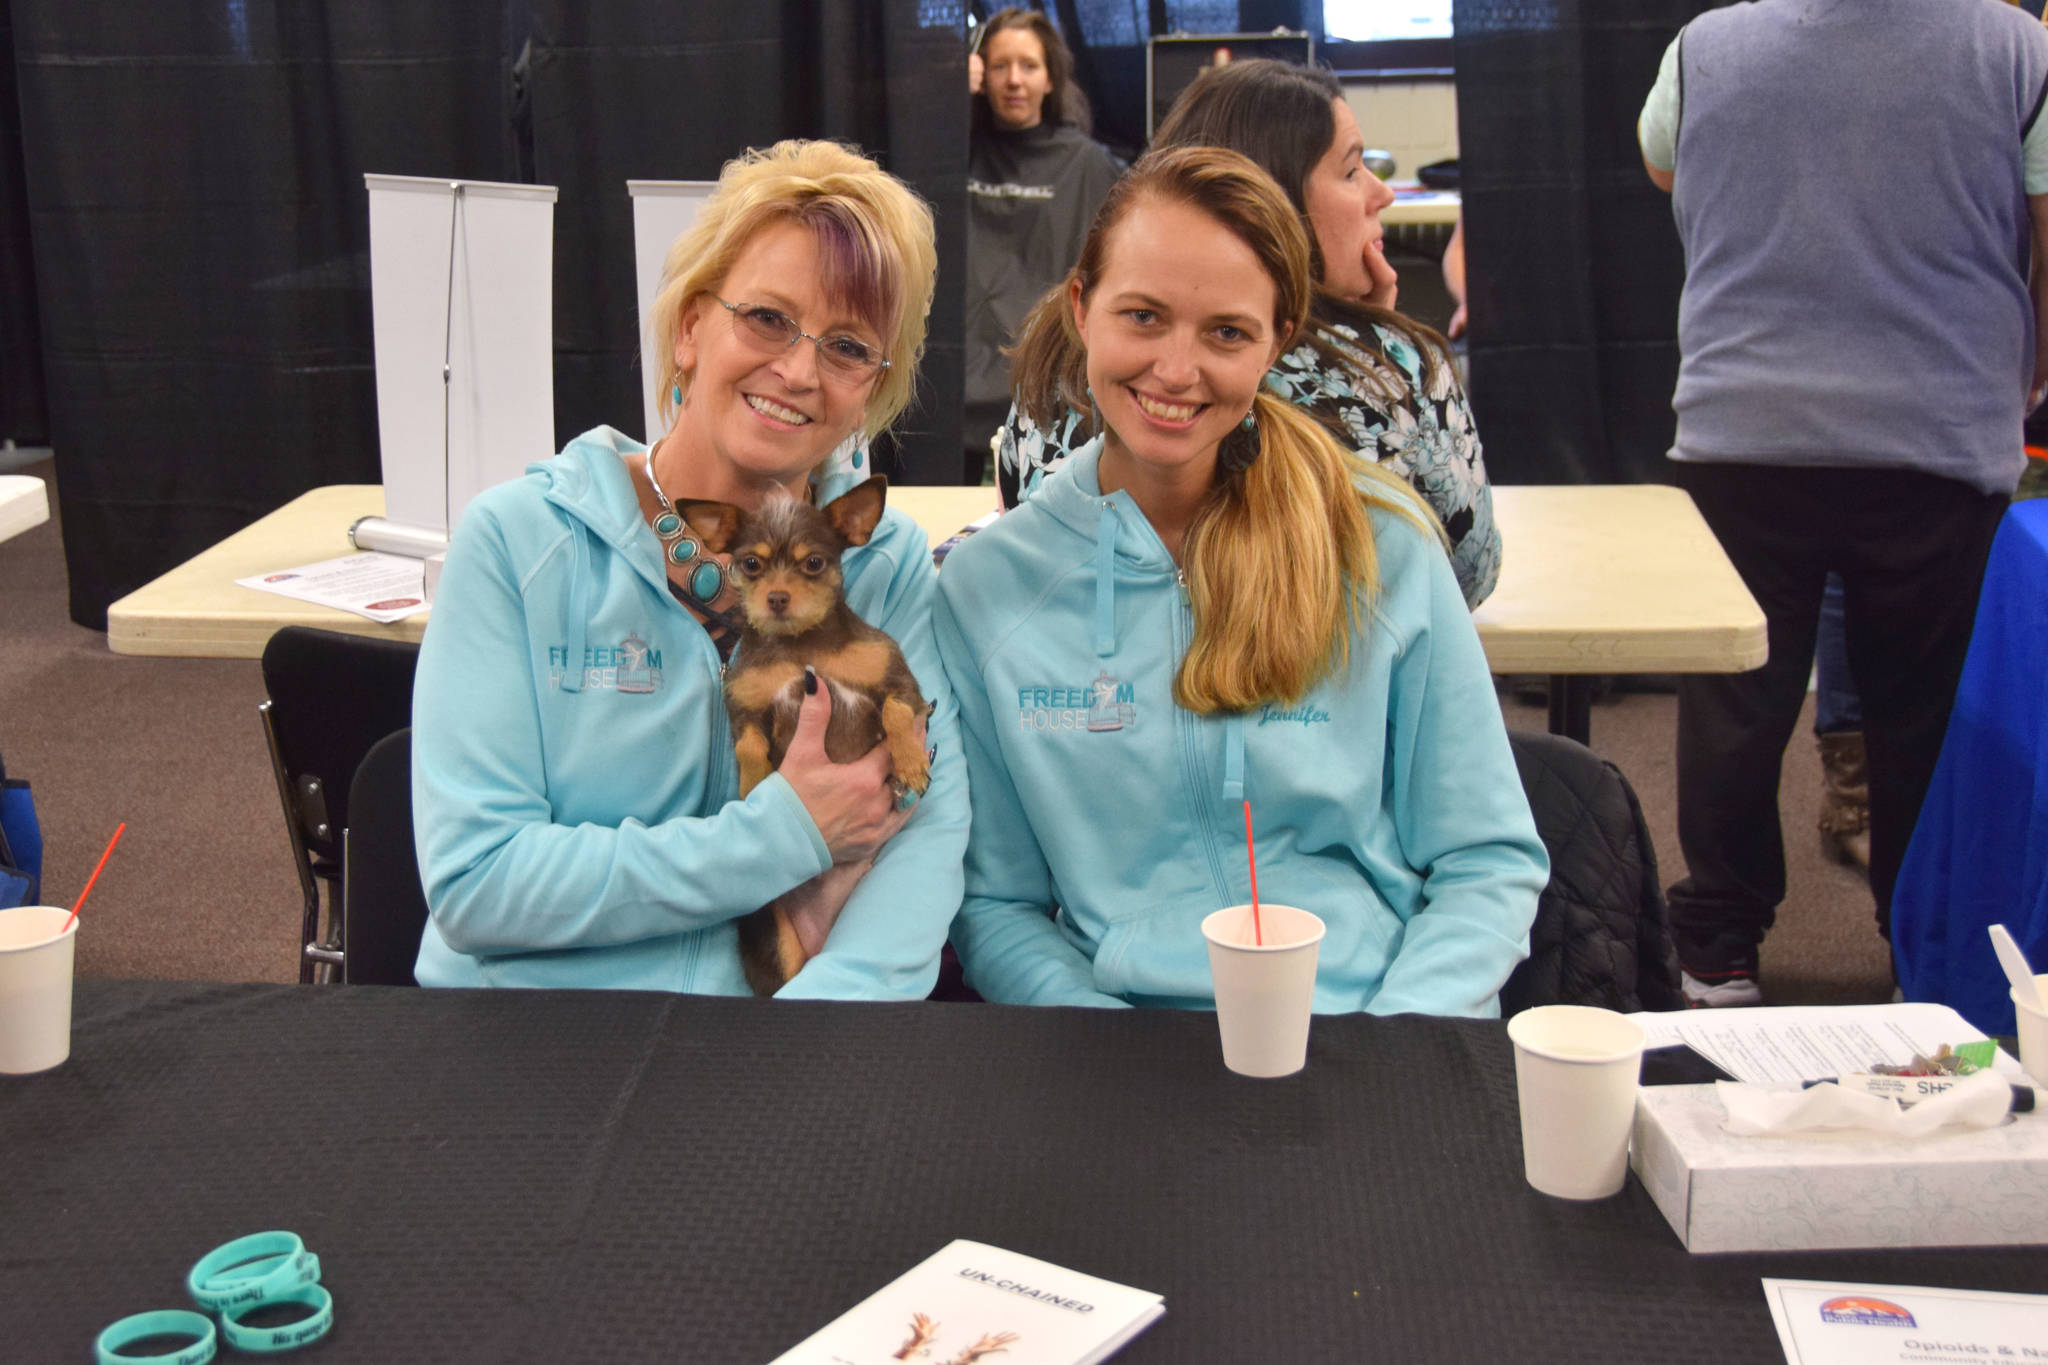 Gail Kennedy, left, Jennifer Waller, and Meiko, the therapy dog from Freedom House, offer their services during Project Homeless Connect at the Soldotna Regional Sports Complex on Wednesday, Jan. 23, 2019. (Photo by Brian Mazurek/Peninsula Clarion)